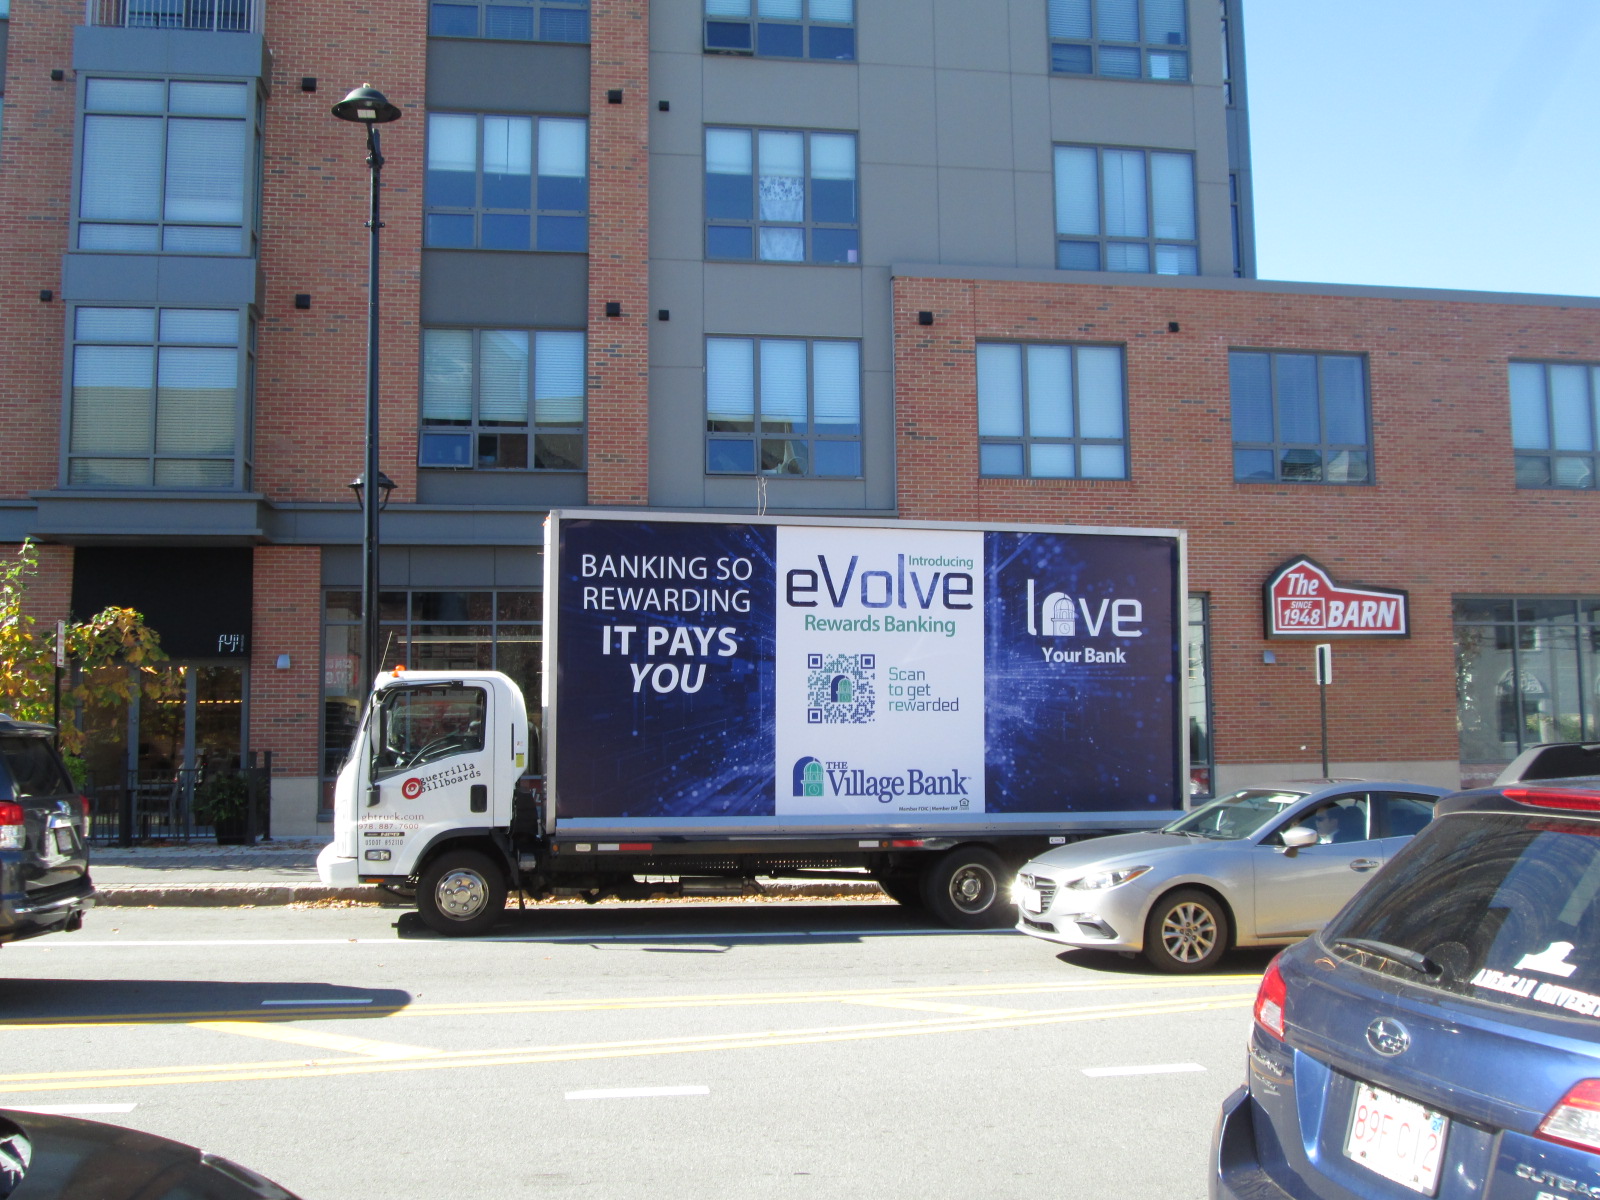 Mobile billboard truck stopped in front of The Barn Family Shoe Store on Walnut Street in Newtonville MA